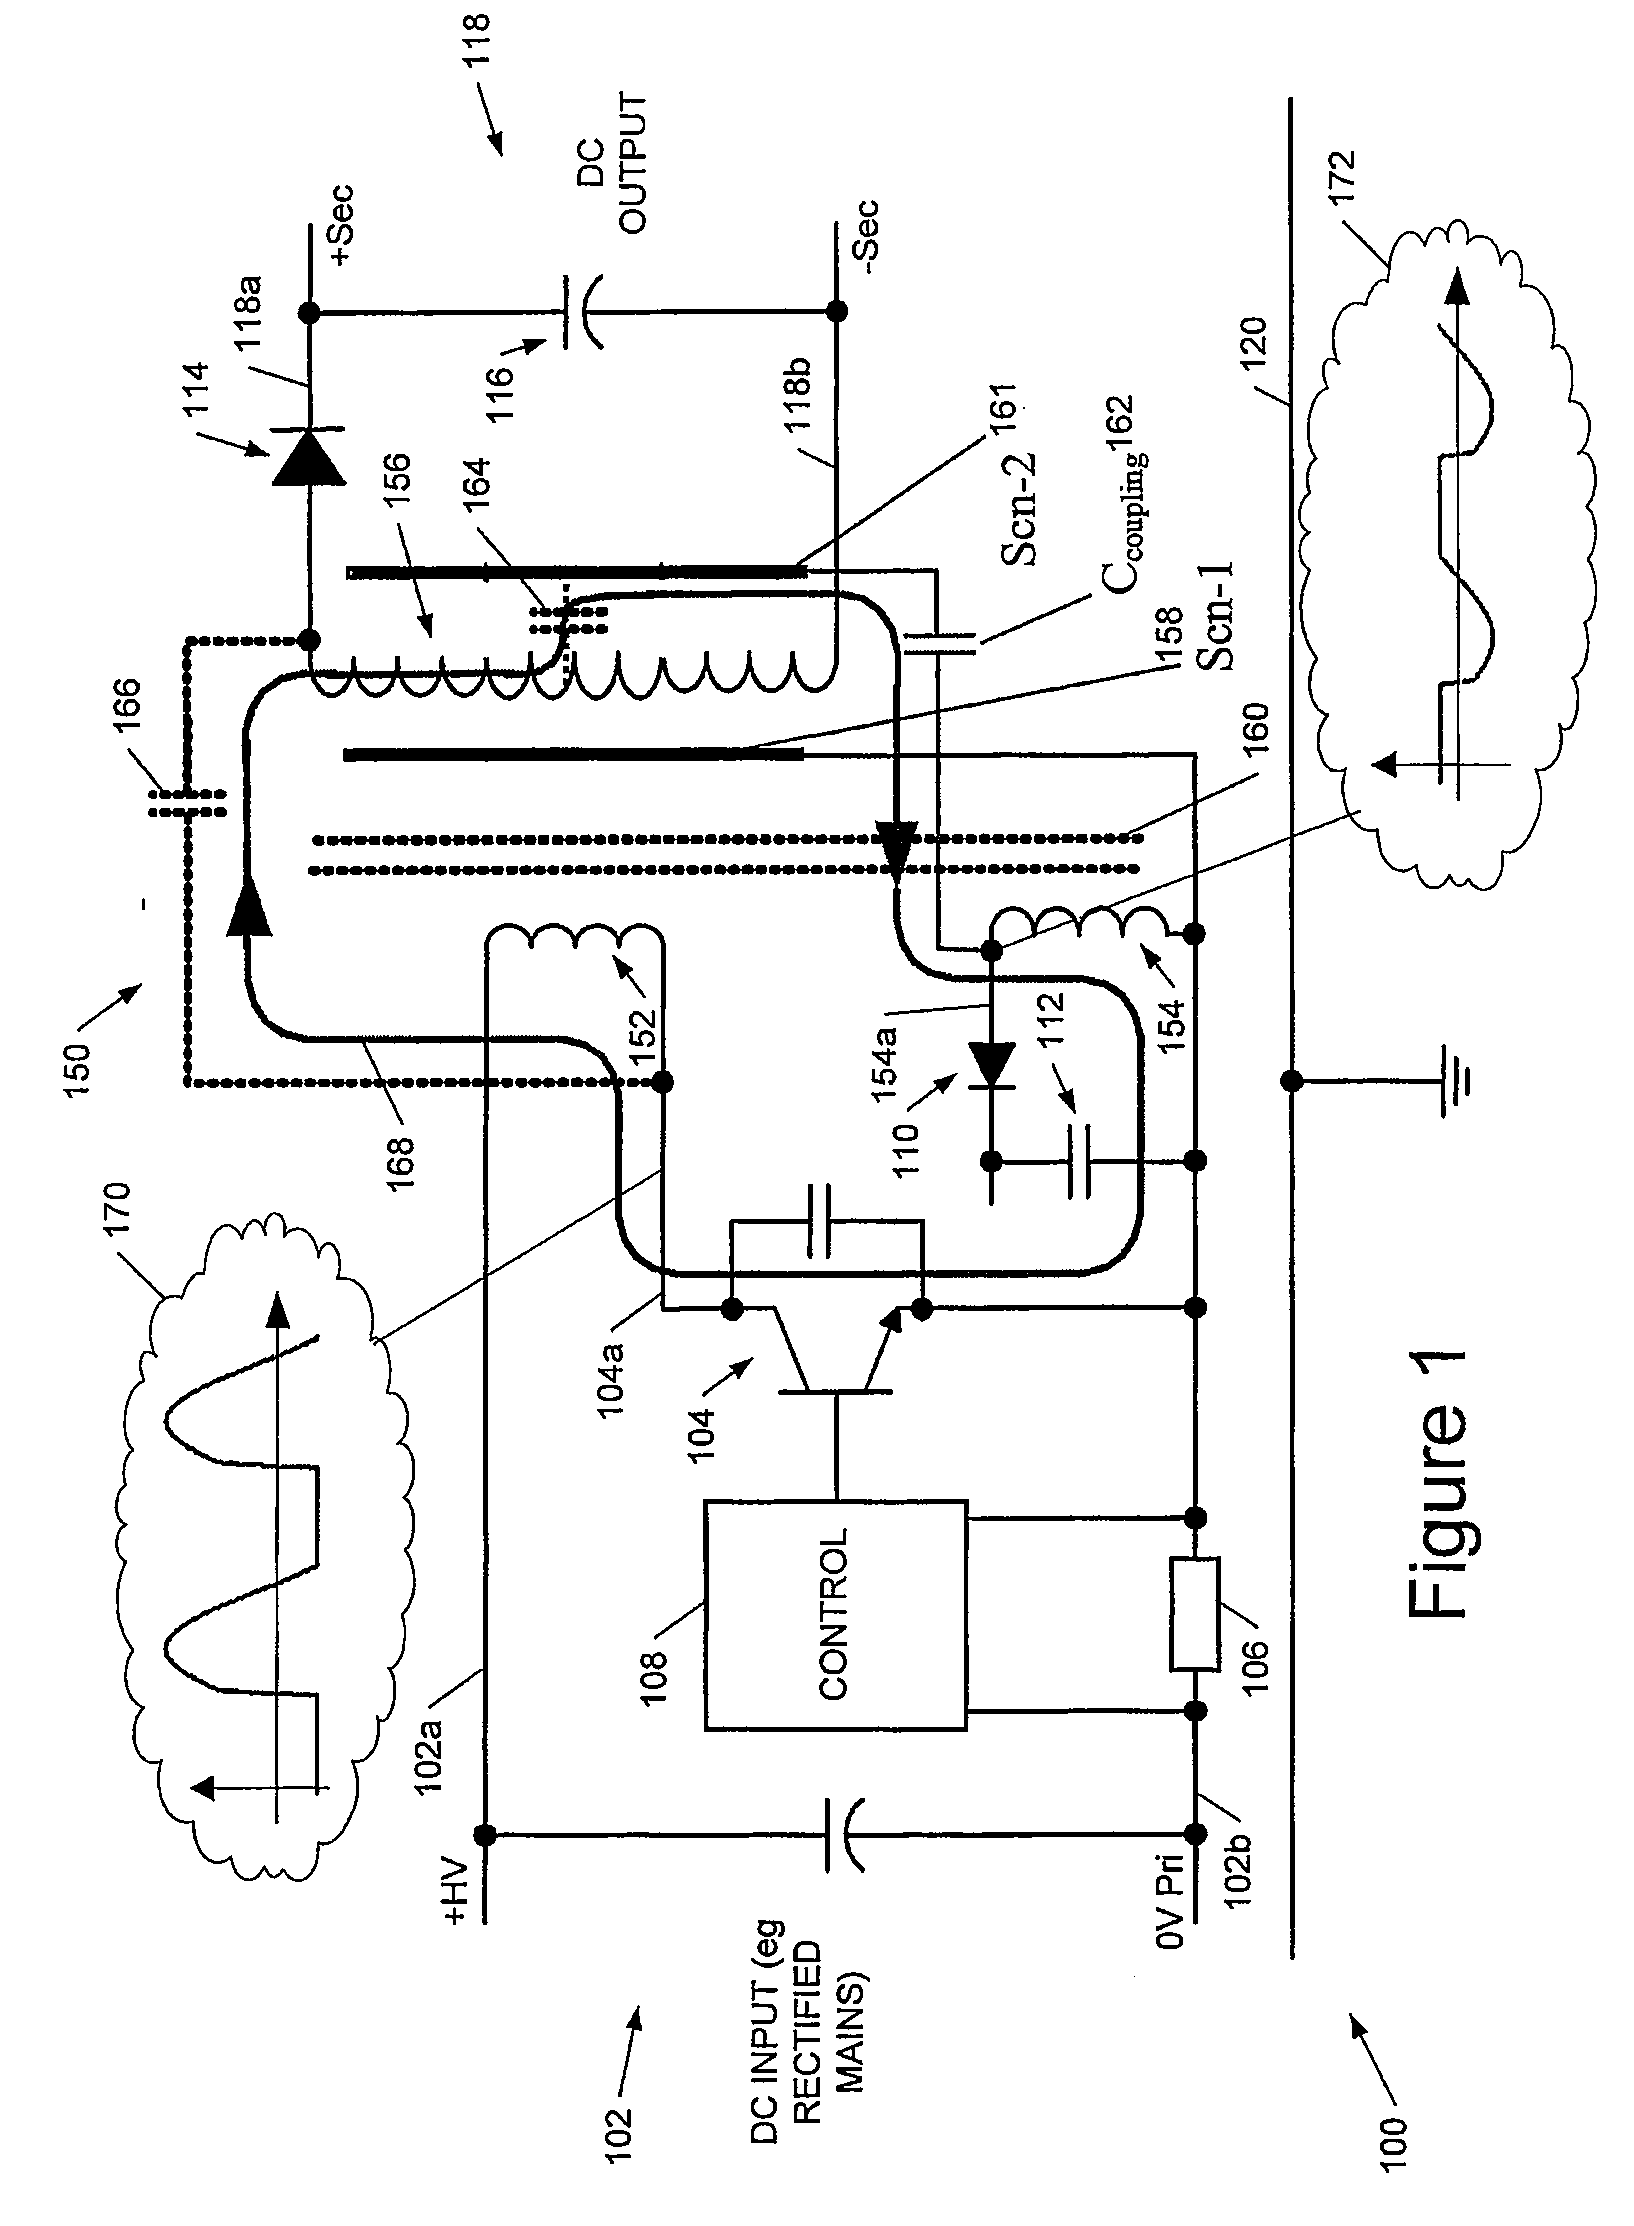 Noise reduction systems and methods